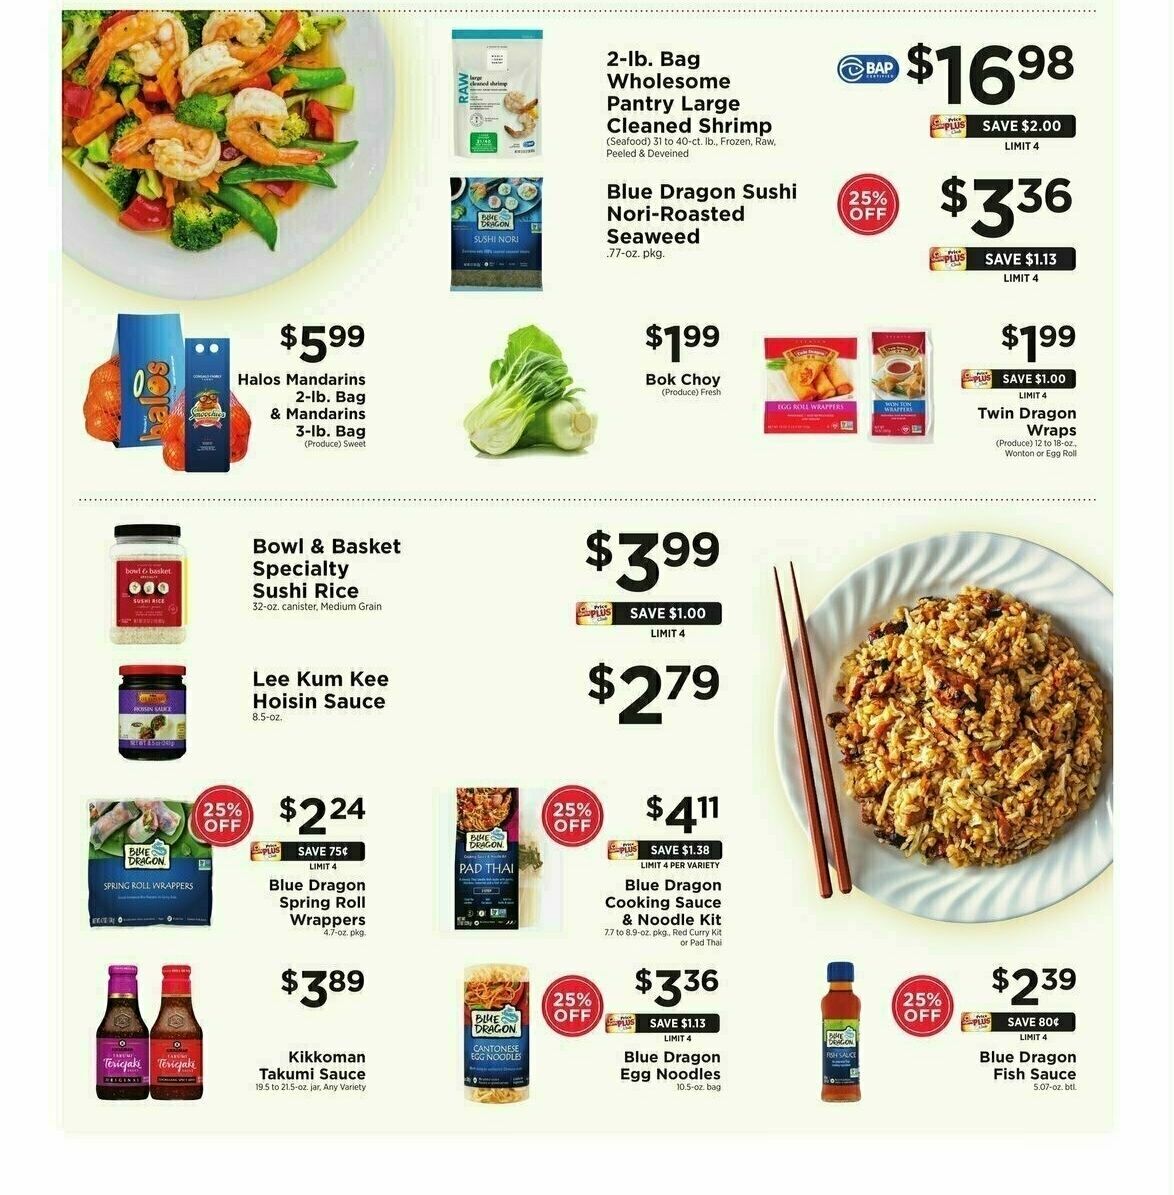 ShopRite Lunar New Year Weekly Ad from February 2